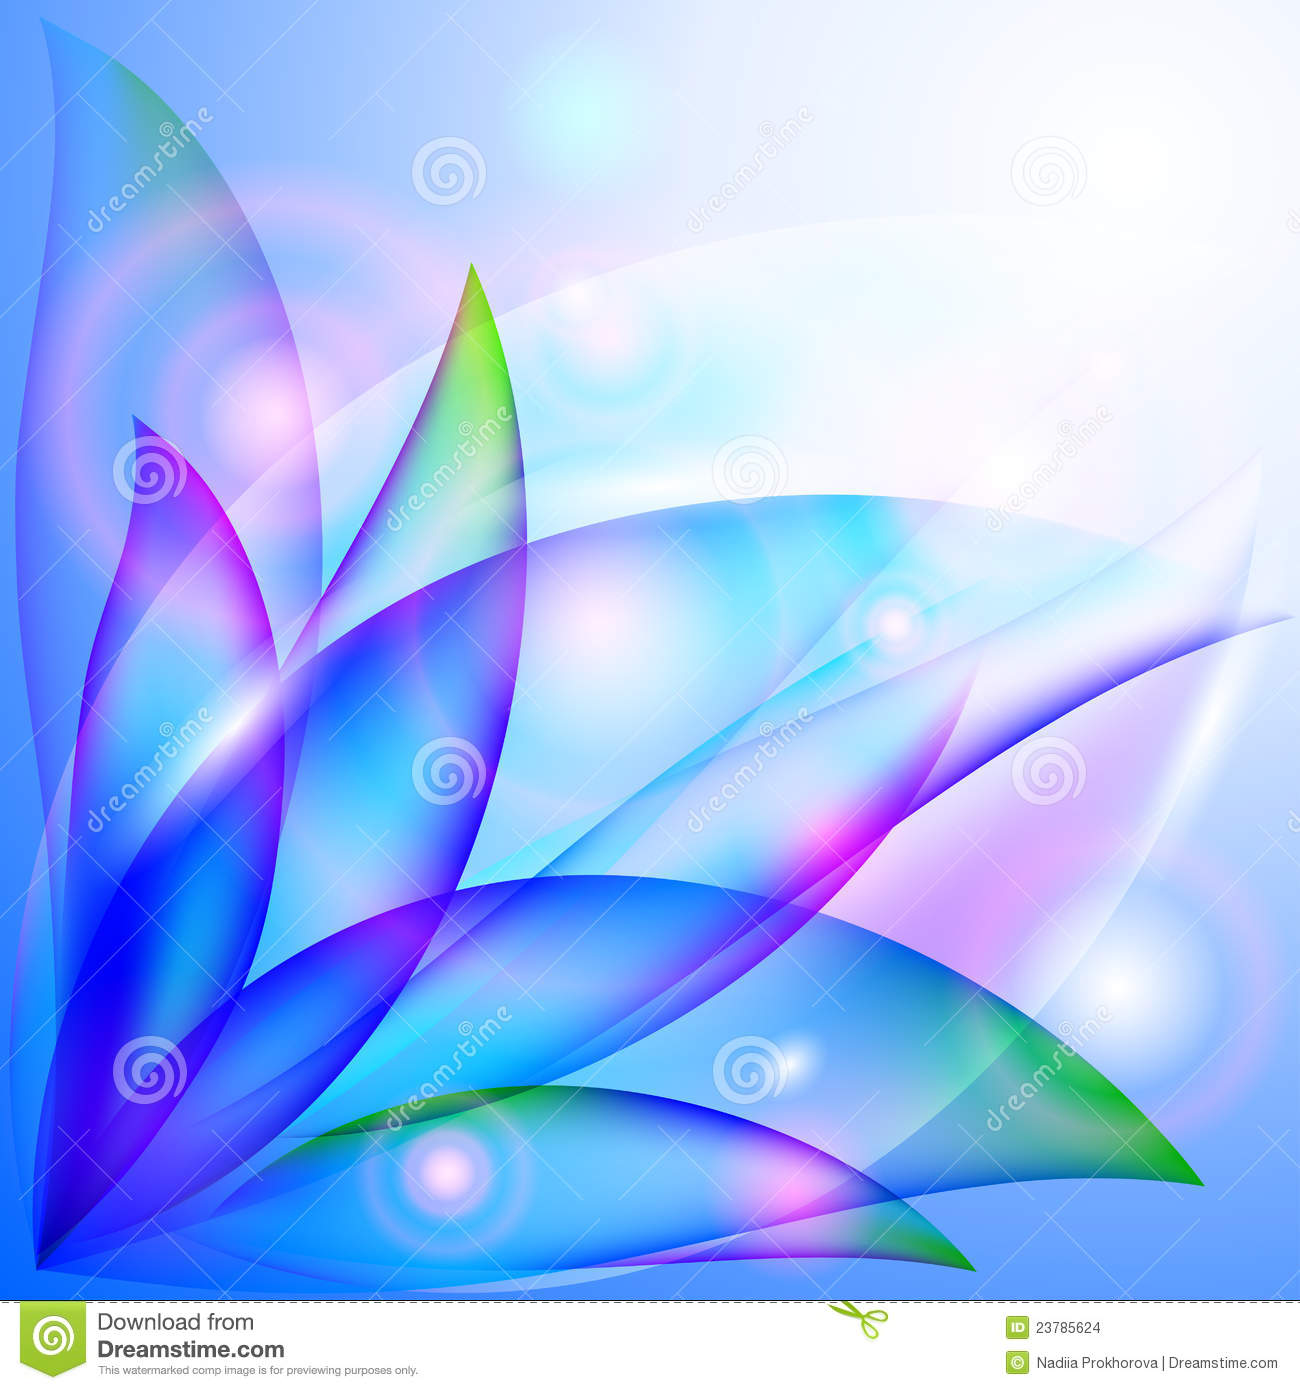 Abstract Fresh Floral Design